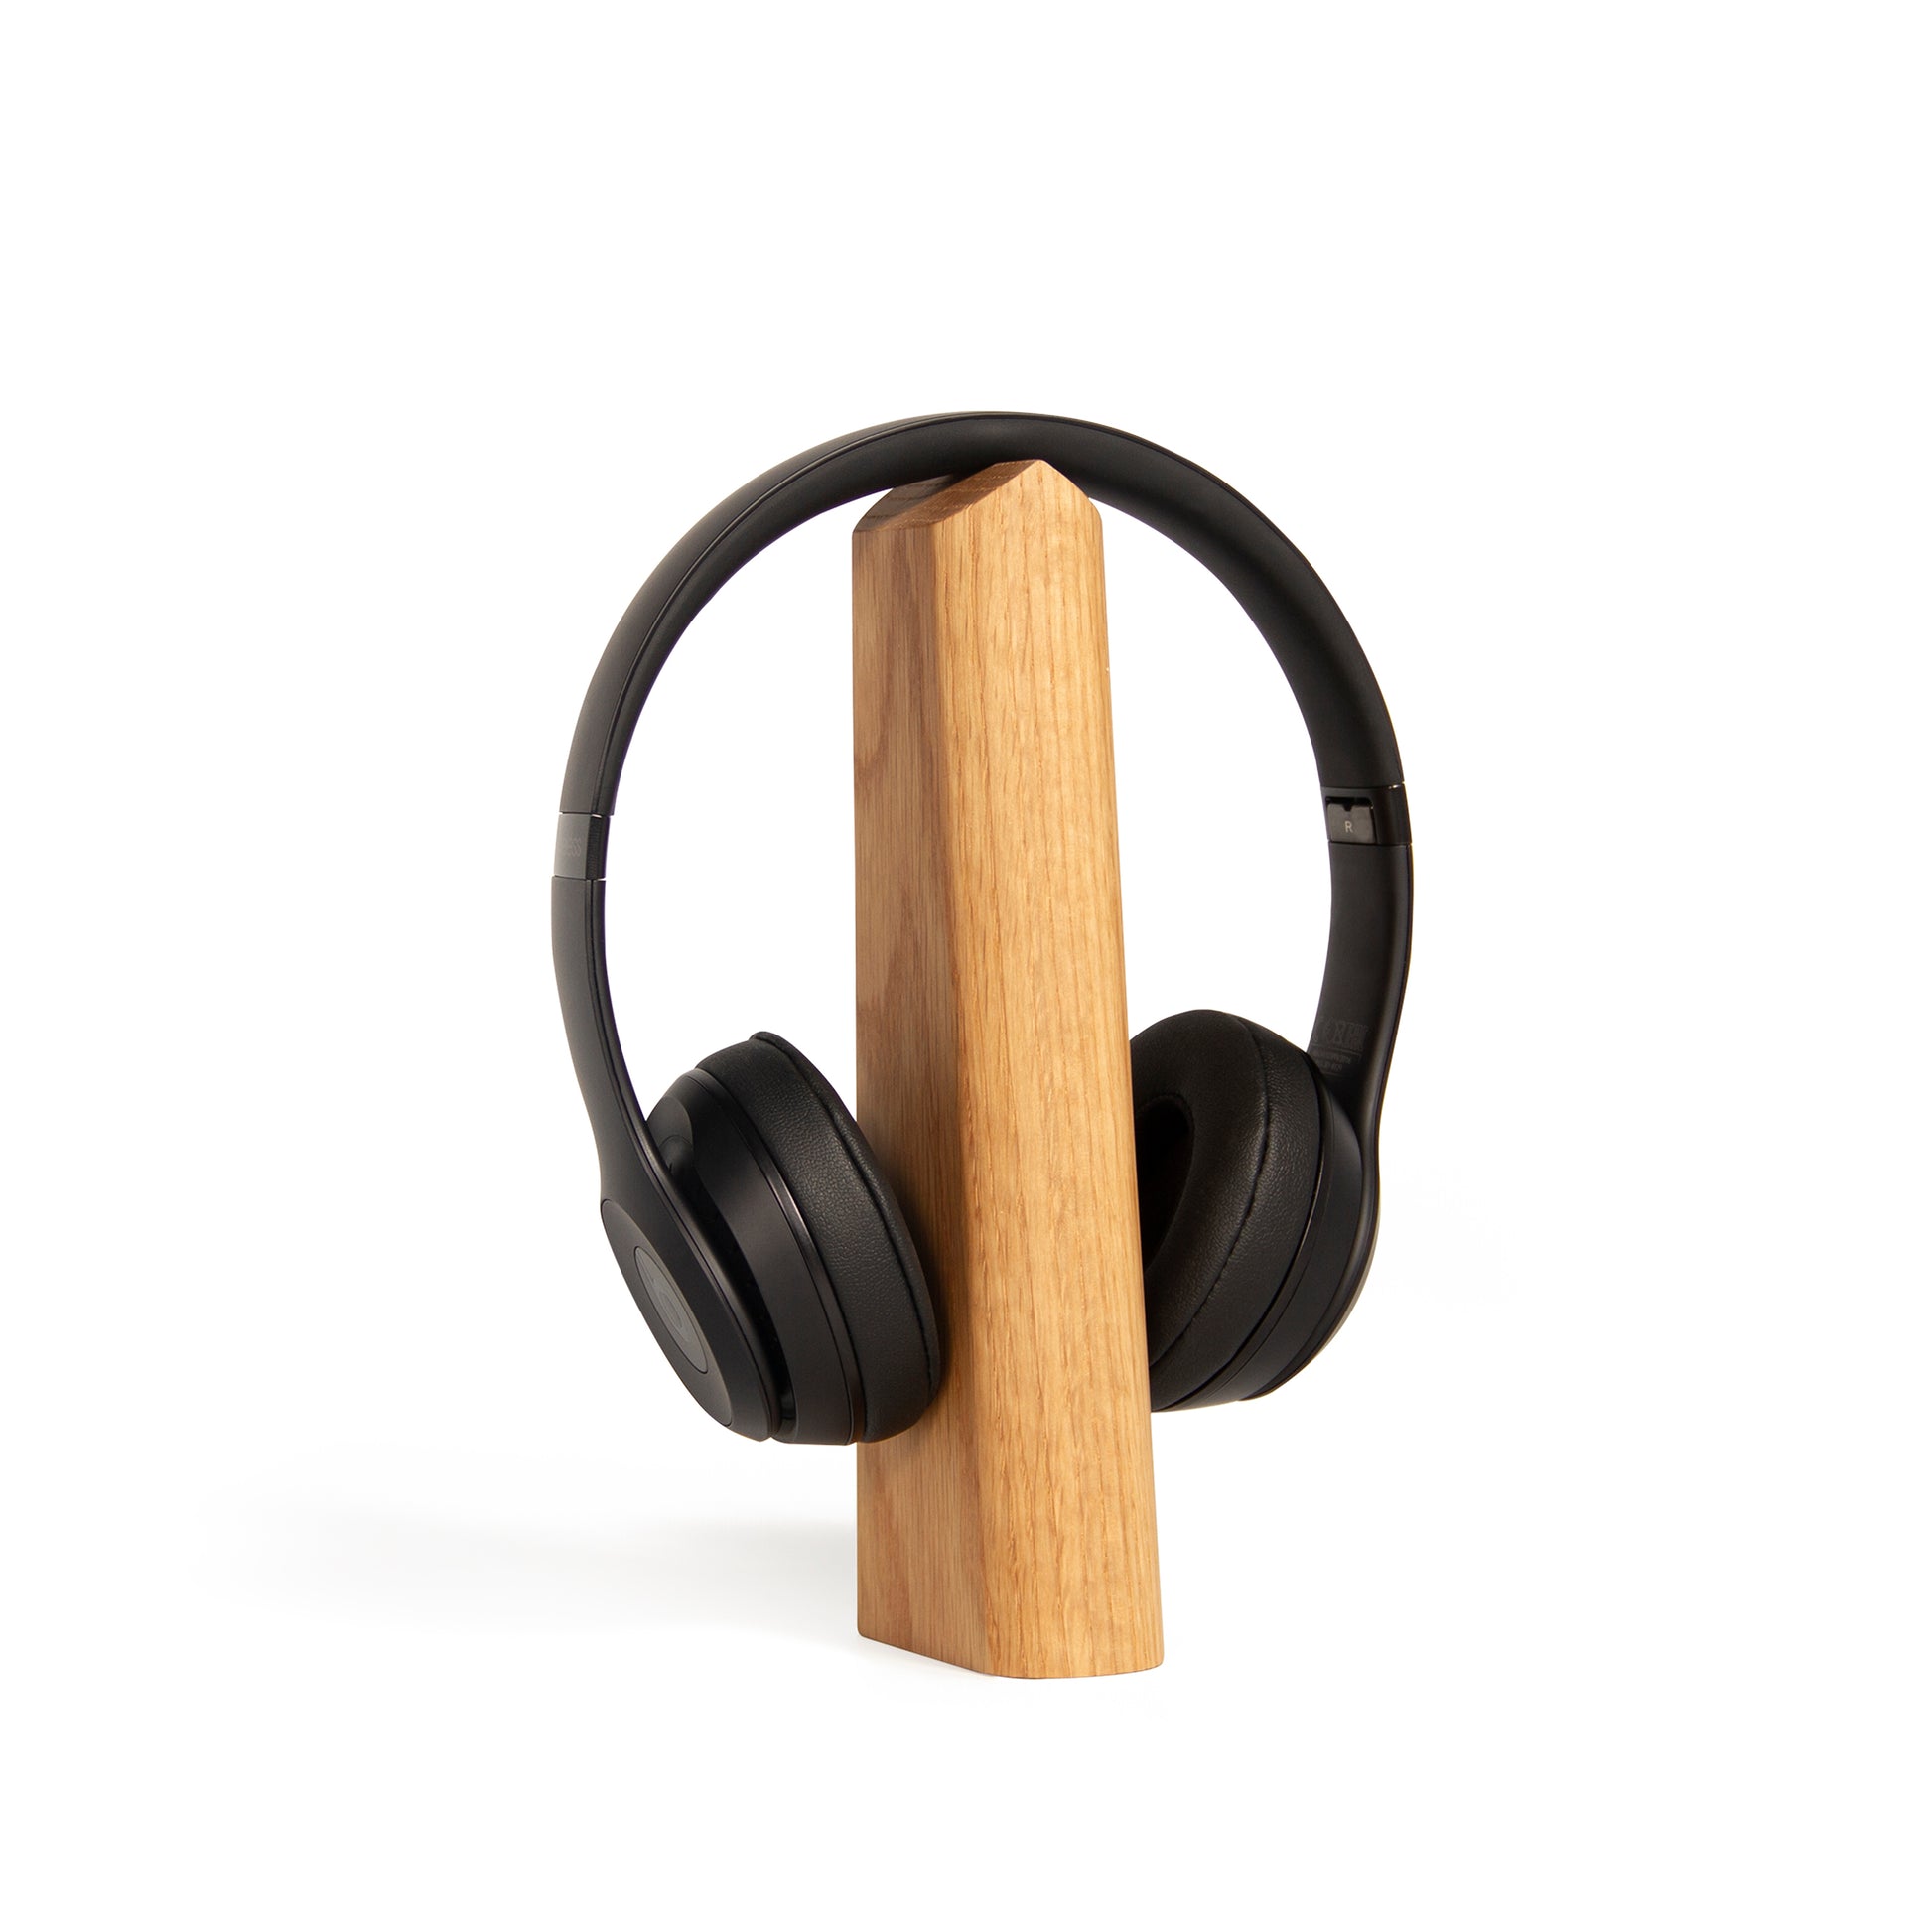 Woodendot Headphone stand in oak with headphones on top against a white background